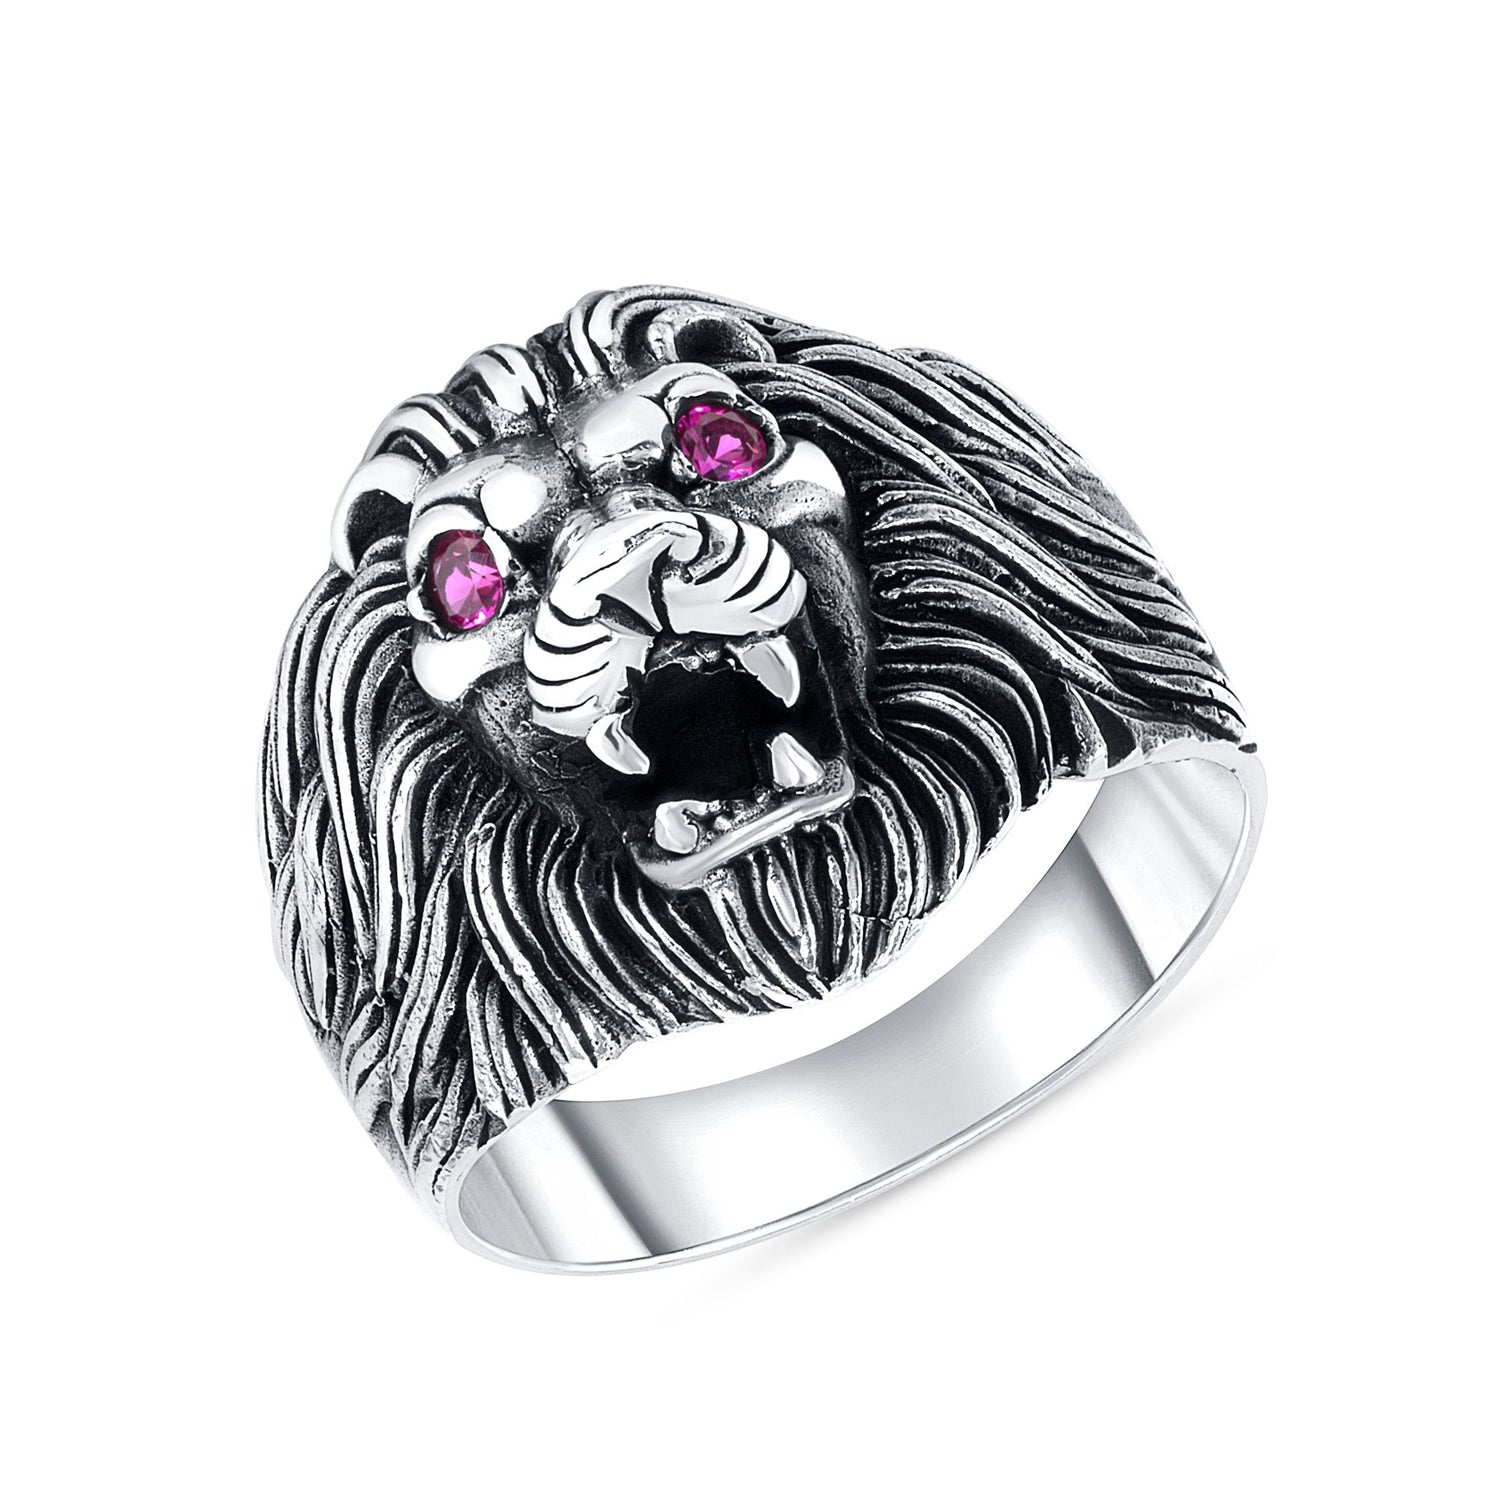 Oxidized 925 Sterling Silver Lion with Pink CZ Eyes Men&